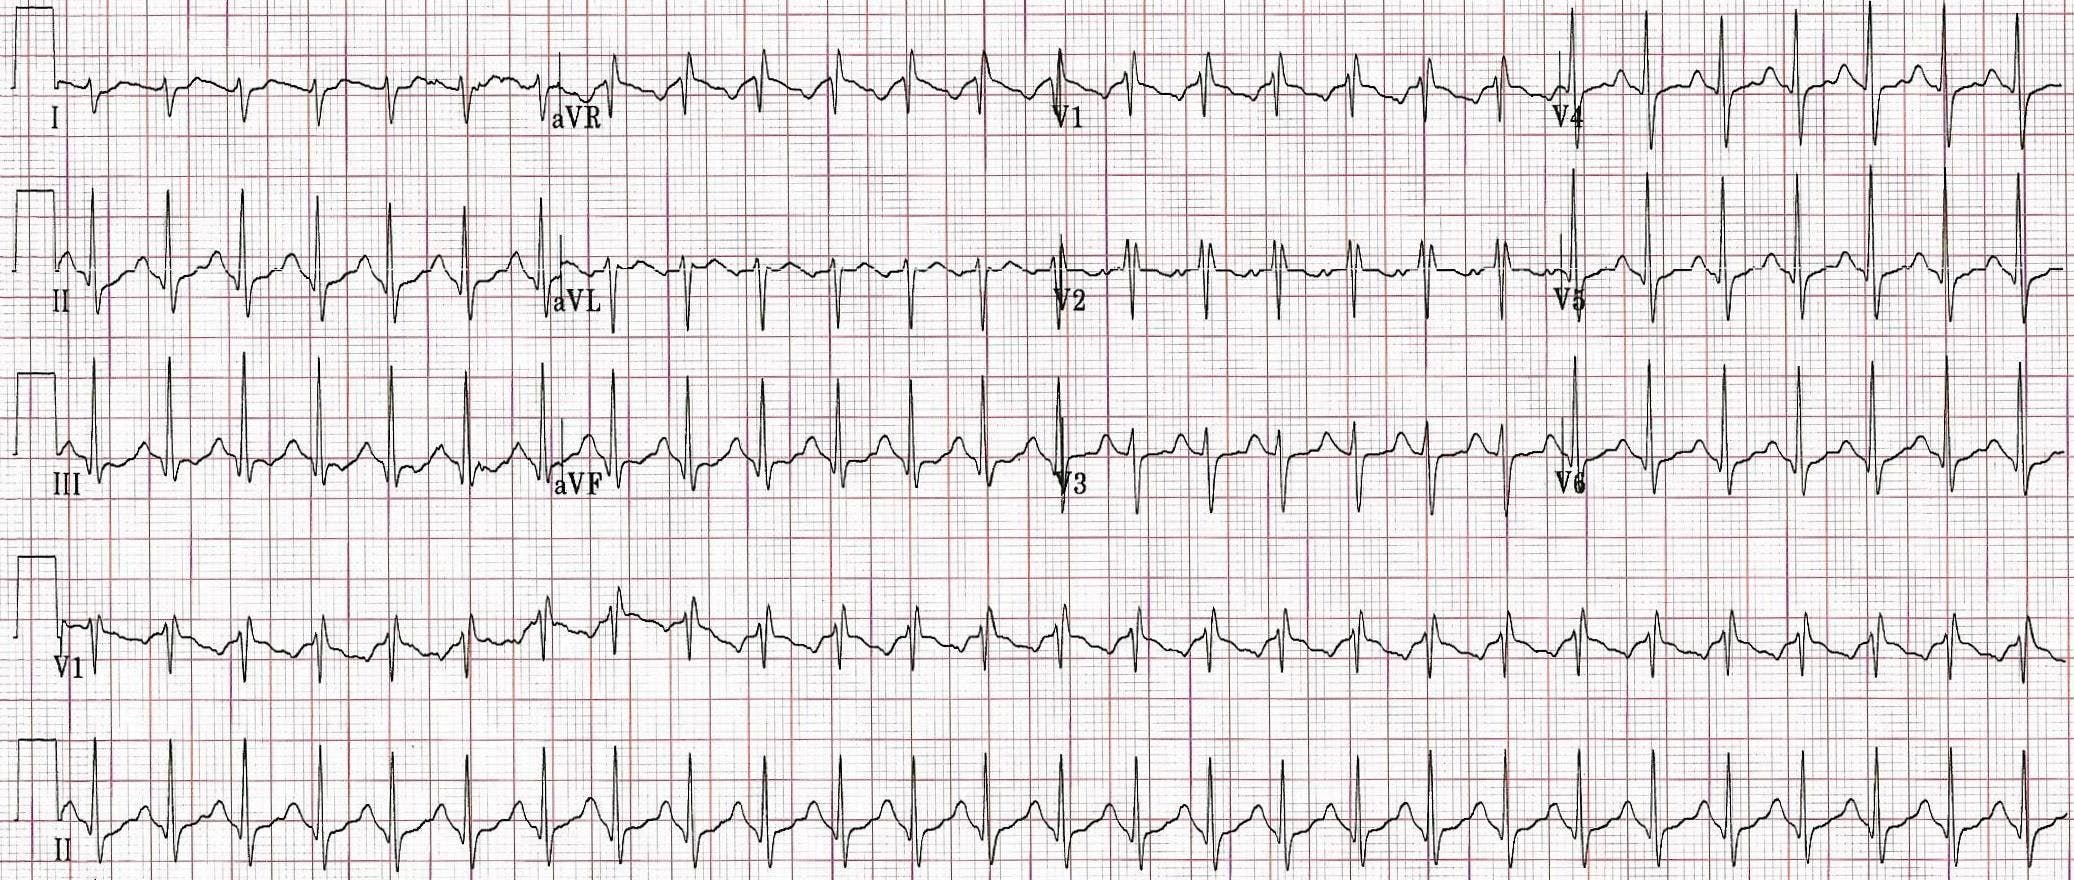 EKG of a patient presenting with overdose